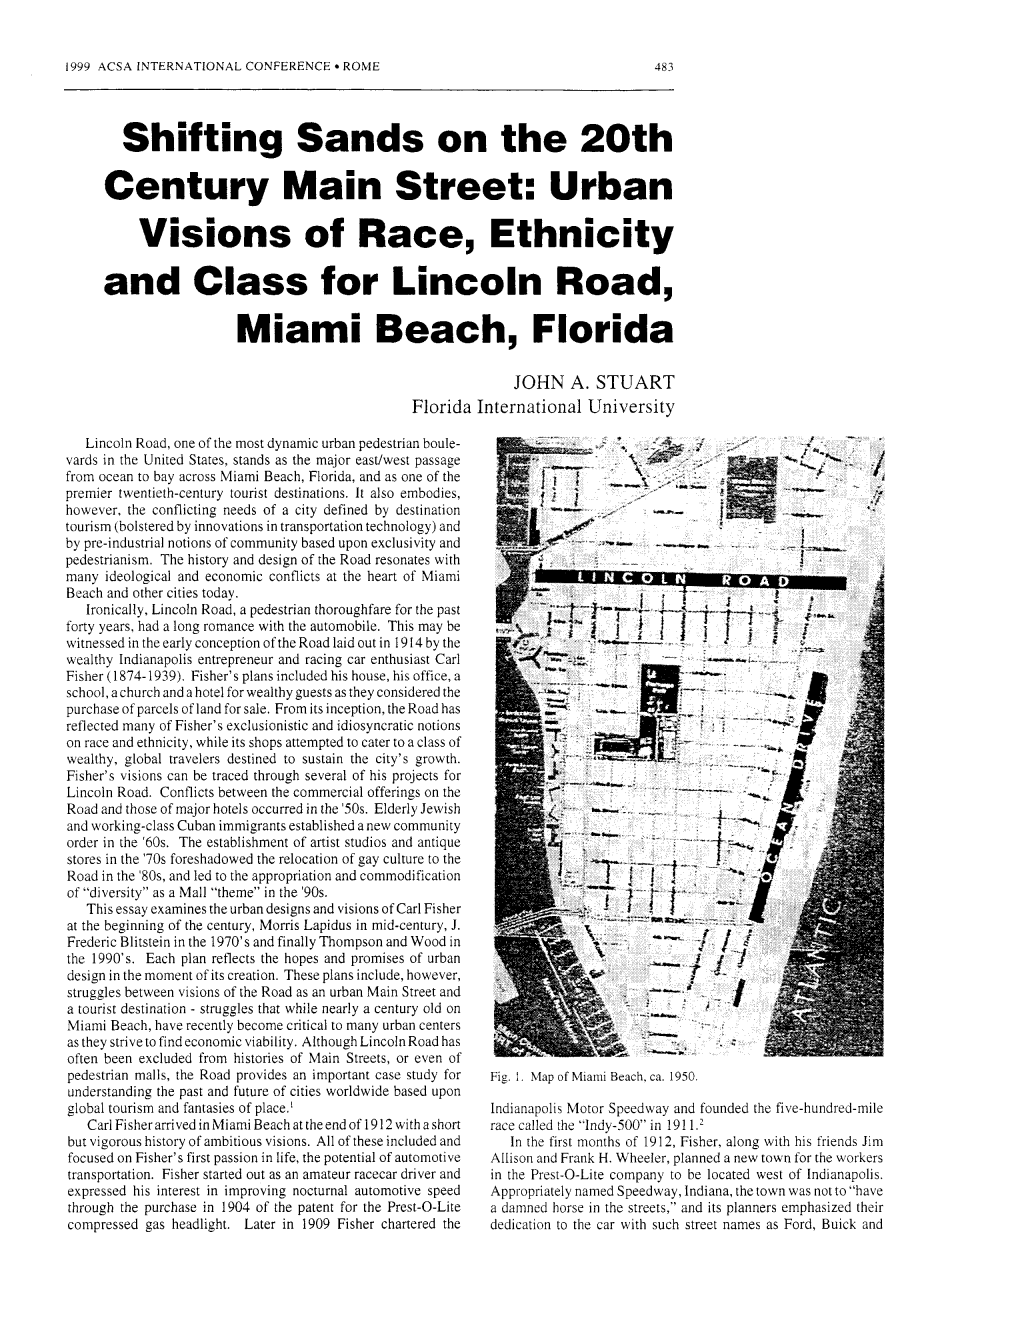 Urban Visions of Race, Ethnicity and Class for Lincoln Road, Miami Beach, Florida